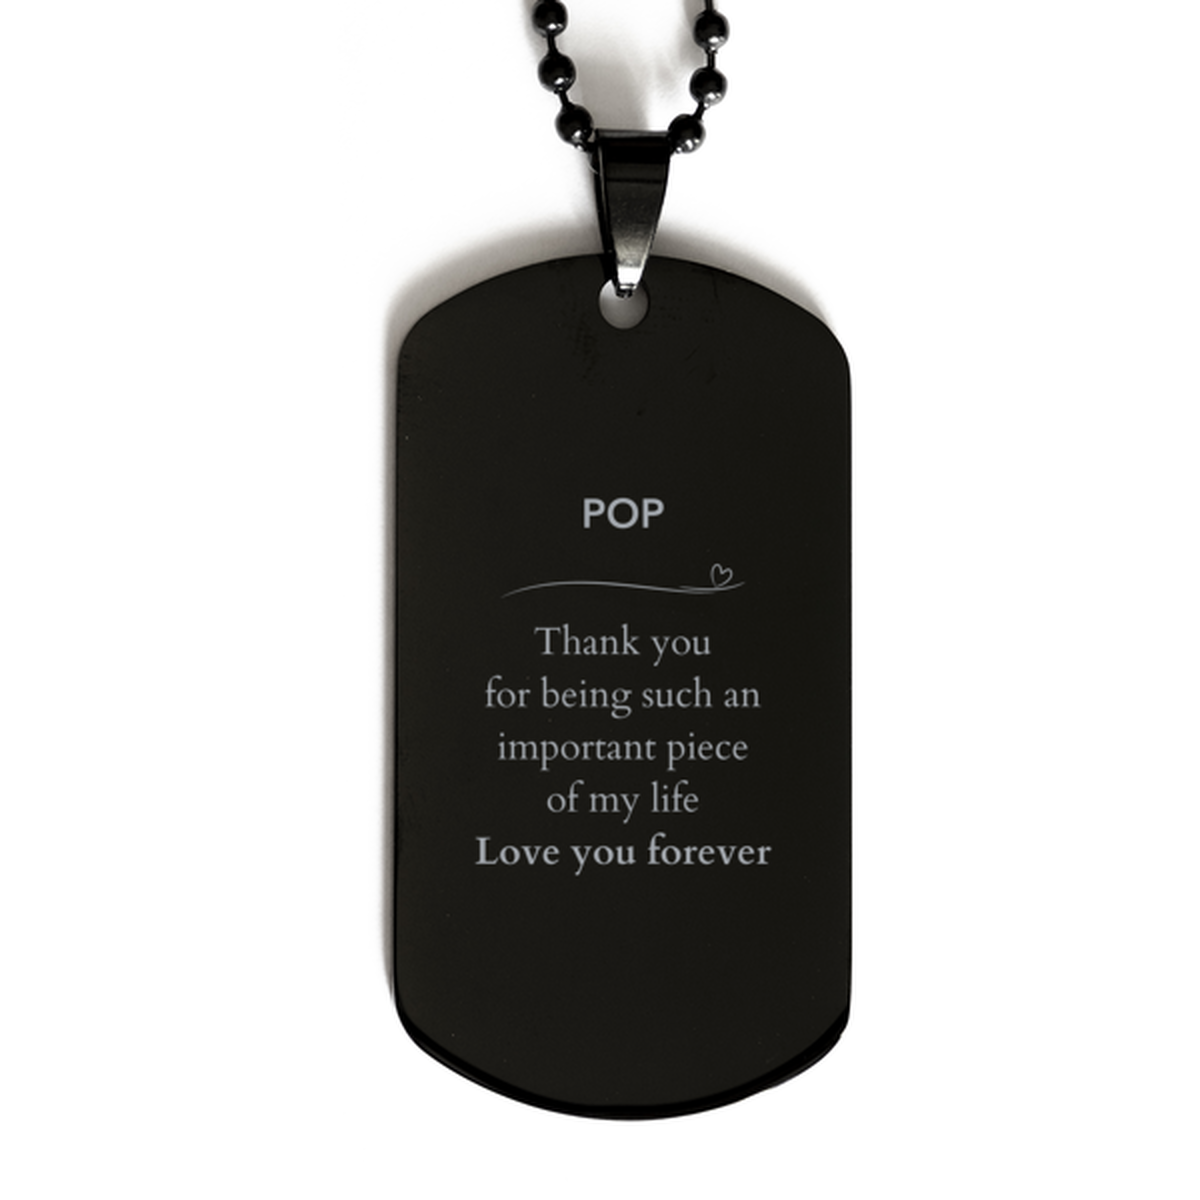 Appropriate Pop Black Dog Tag Epic Birthday Gifts for Pop Thank you for being such an important piece of my life Pop Christmas Mothers Fathers Day